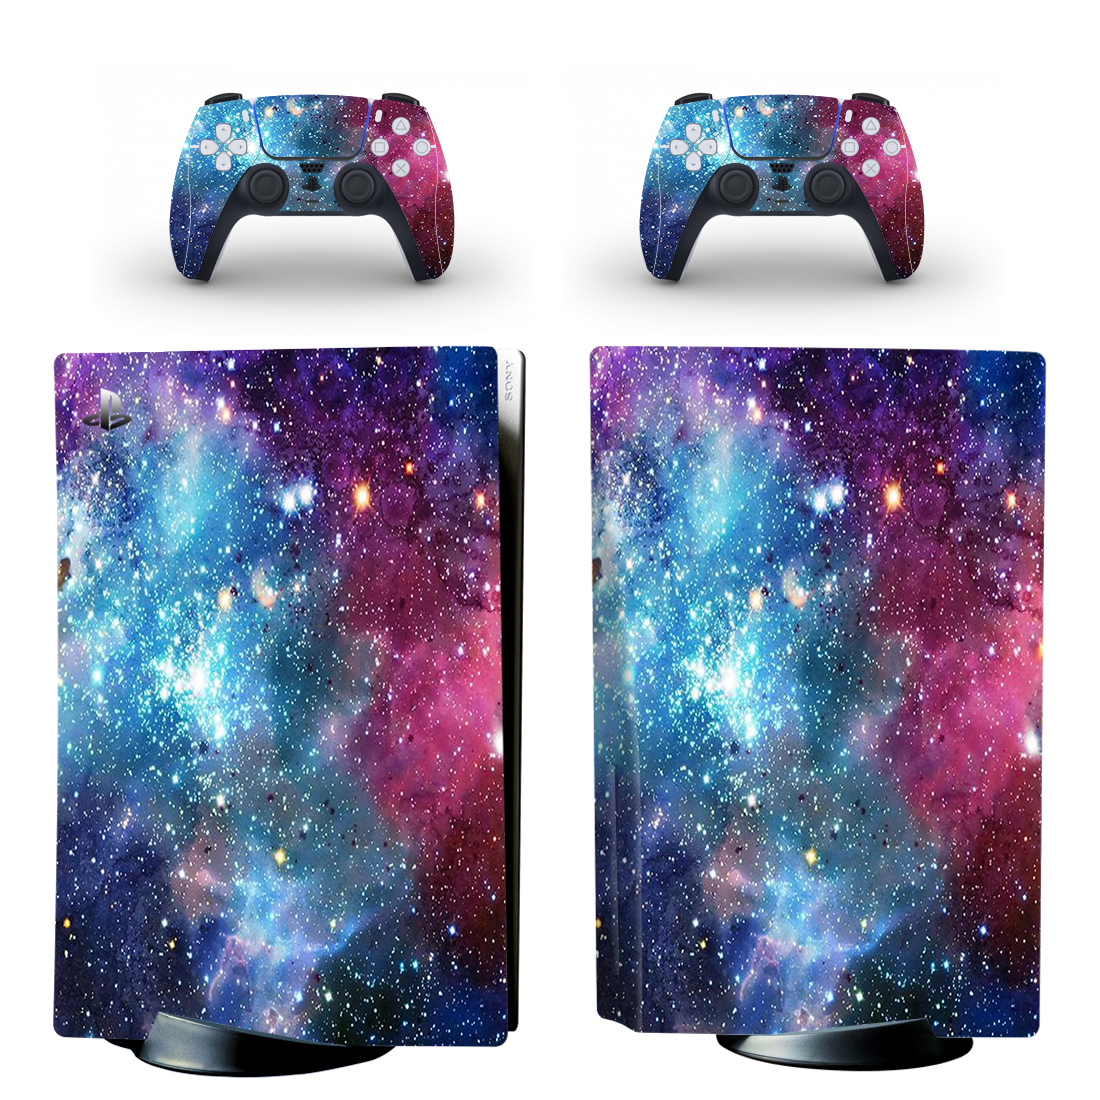 Blue And Purple Galaxy With Stars PS5 Skin Sticker Decal